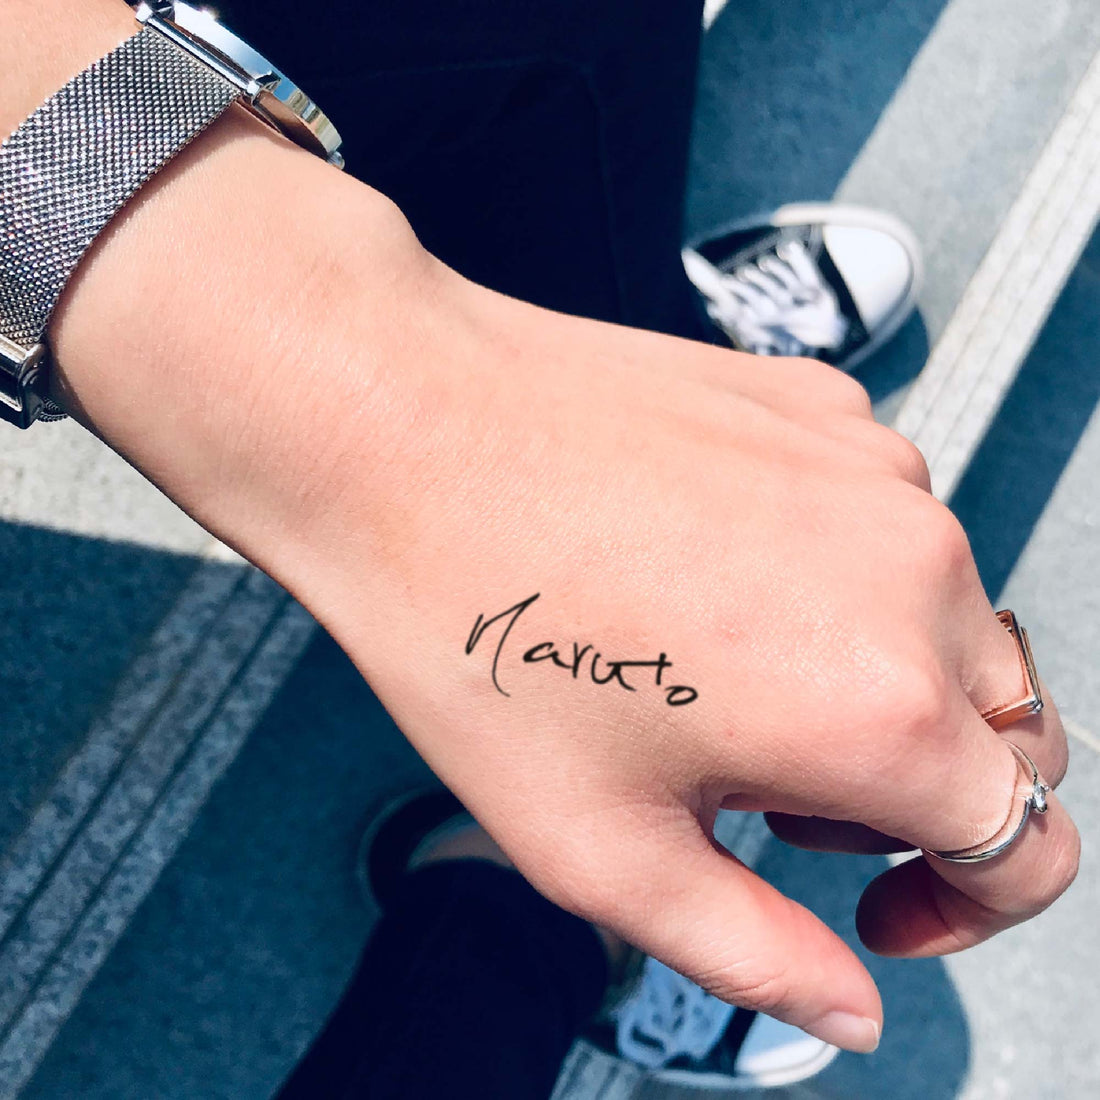 Naruto custom temporary tattoo sticker design idea inspiration meanings removal arm wrist hand words font name signature calligraphy lyrics tour concert outfits merch accessory gift souvenir costumes wear dress up code